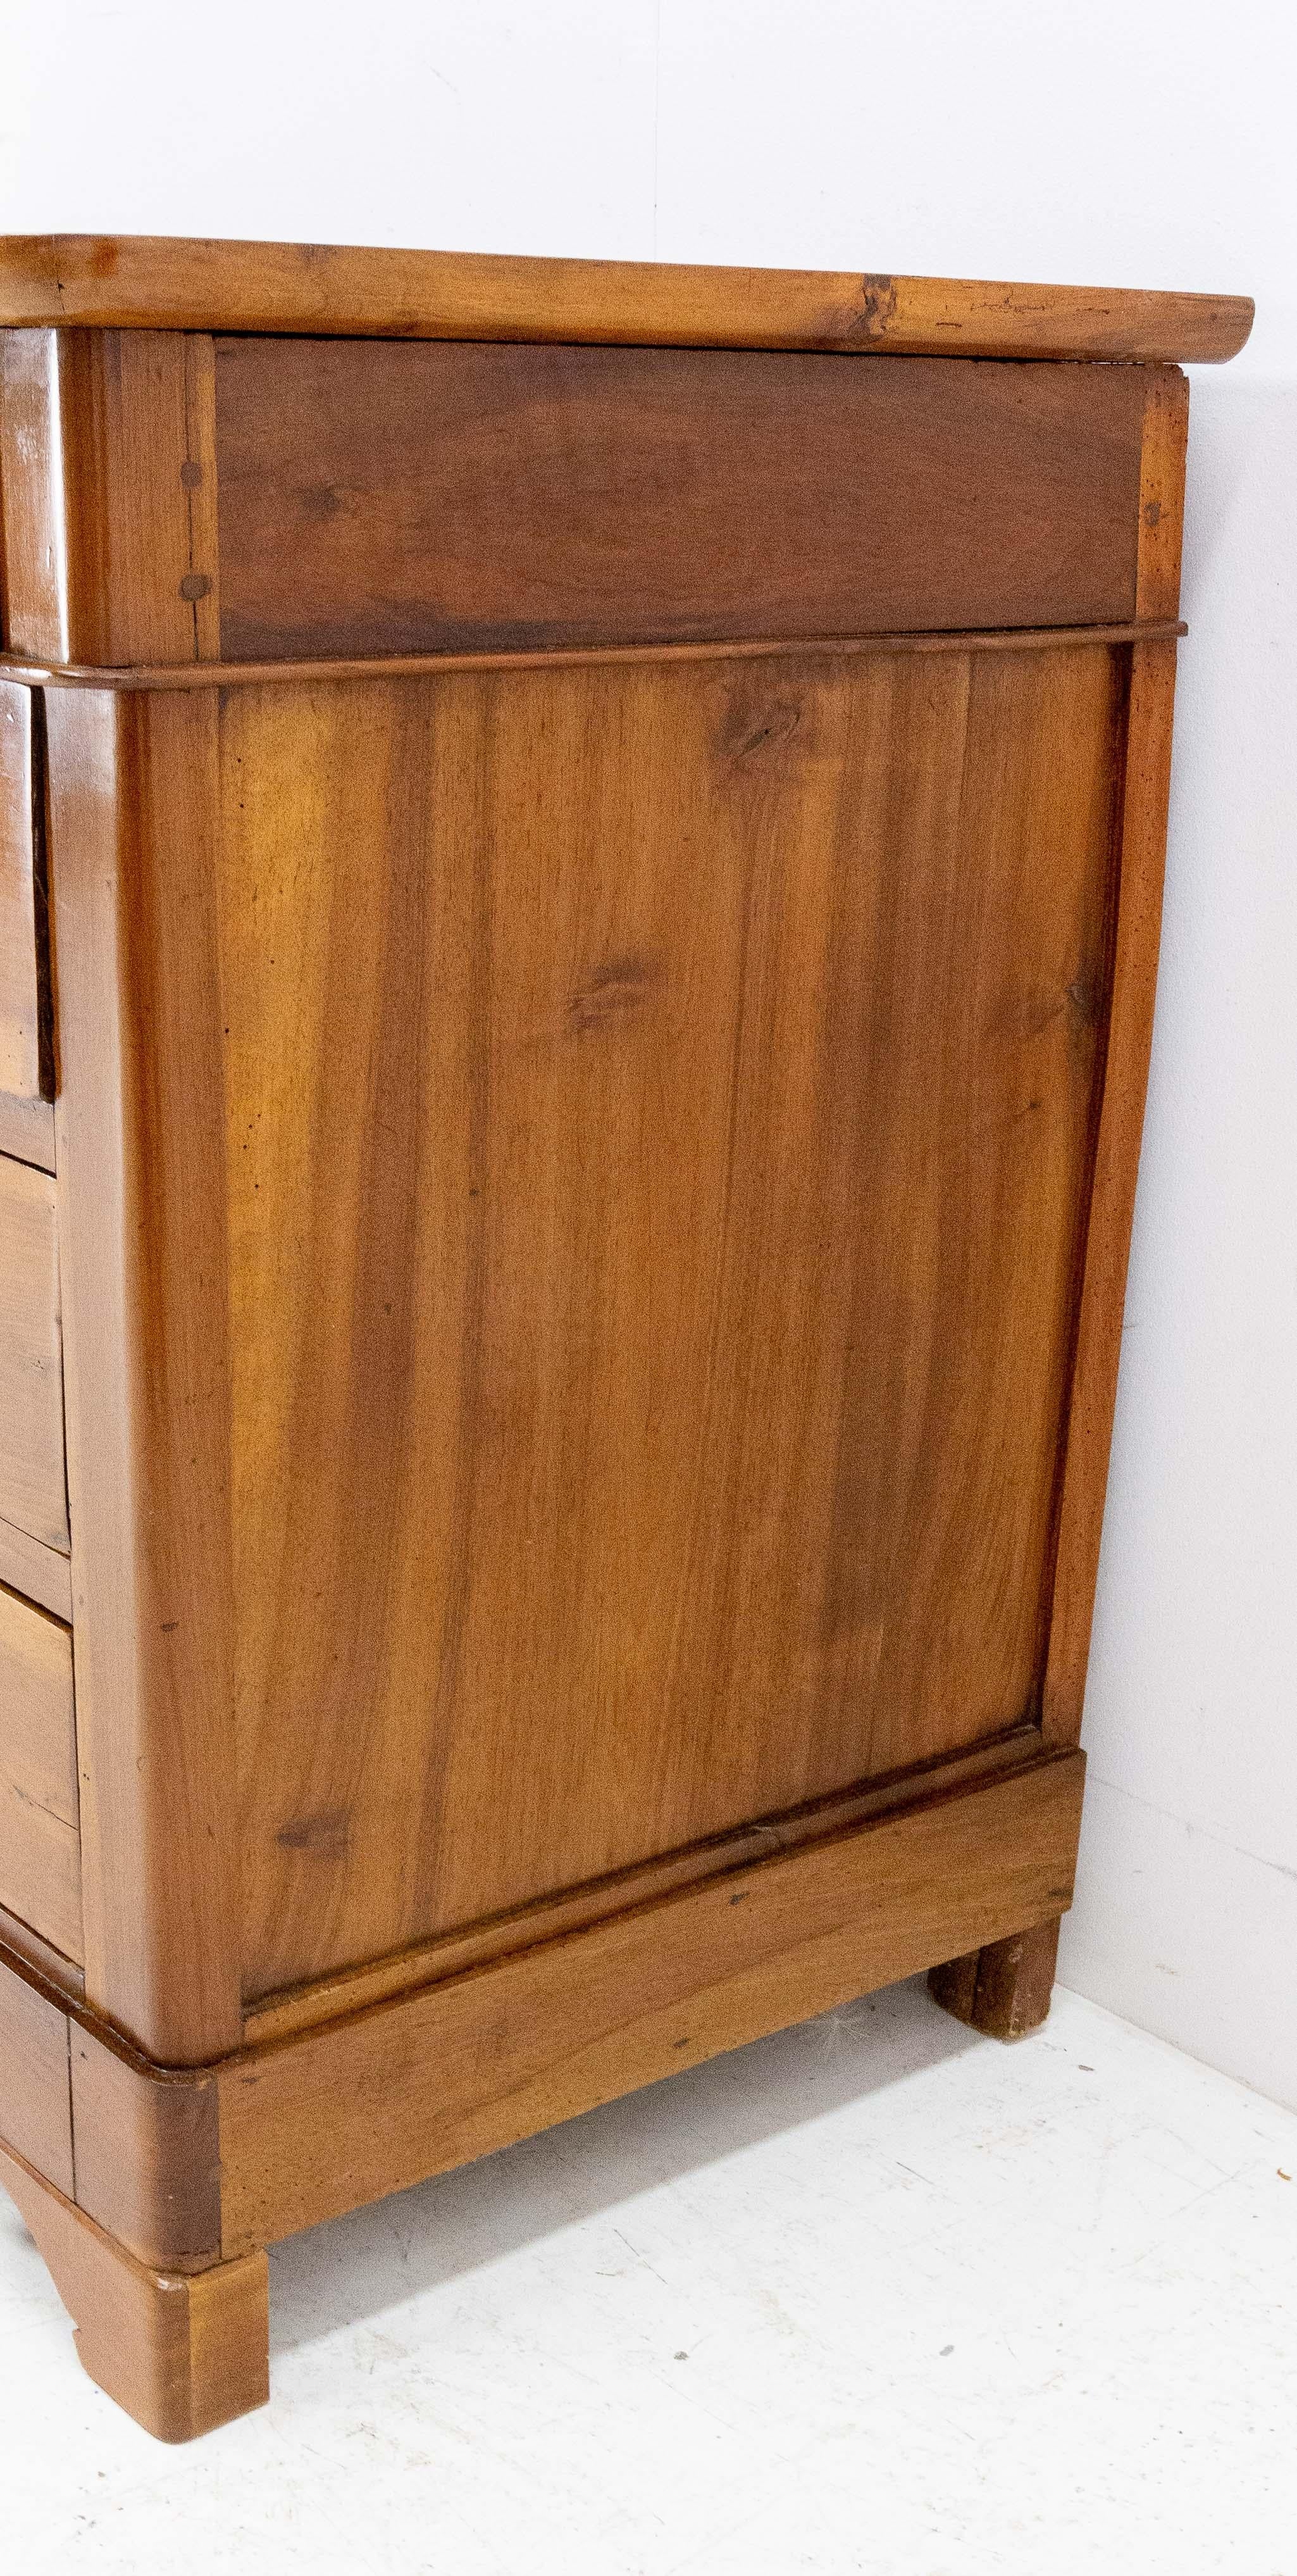 French Empire Style Walnut Commode Chest of Drawers, circa 1820 In Good Condition For Sale In Labrit, Landes